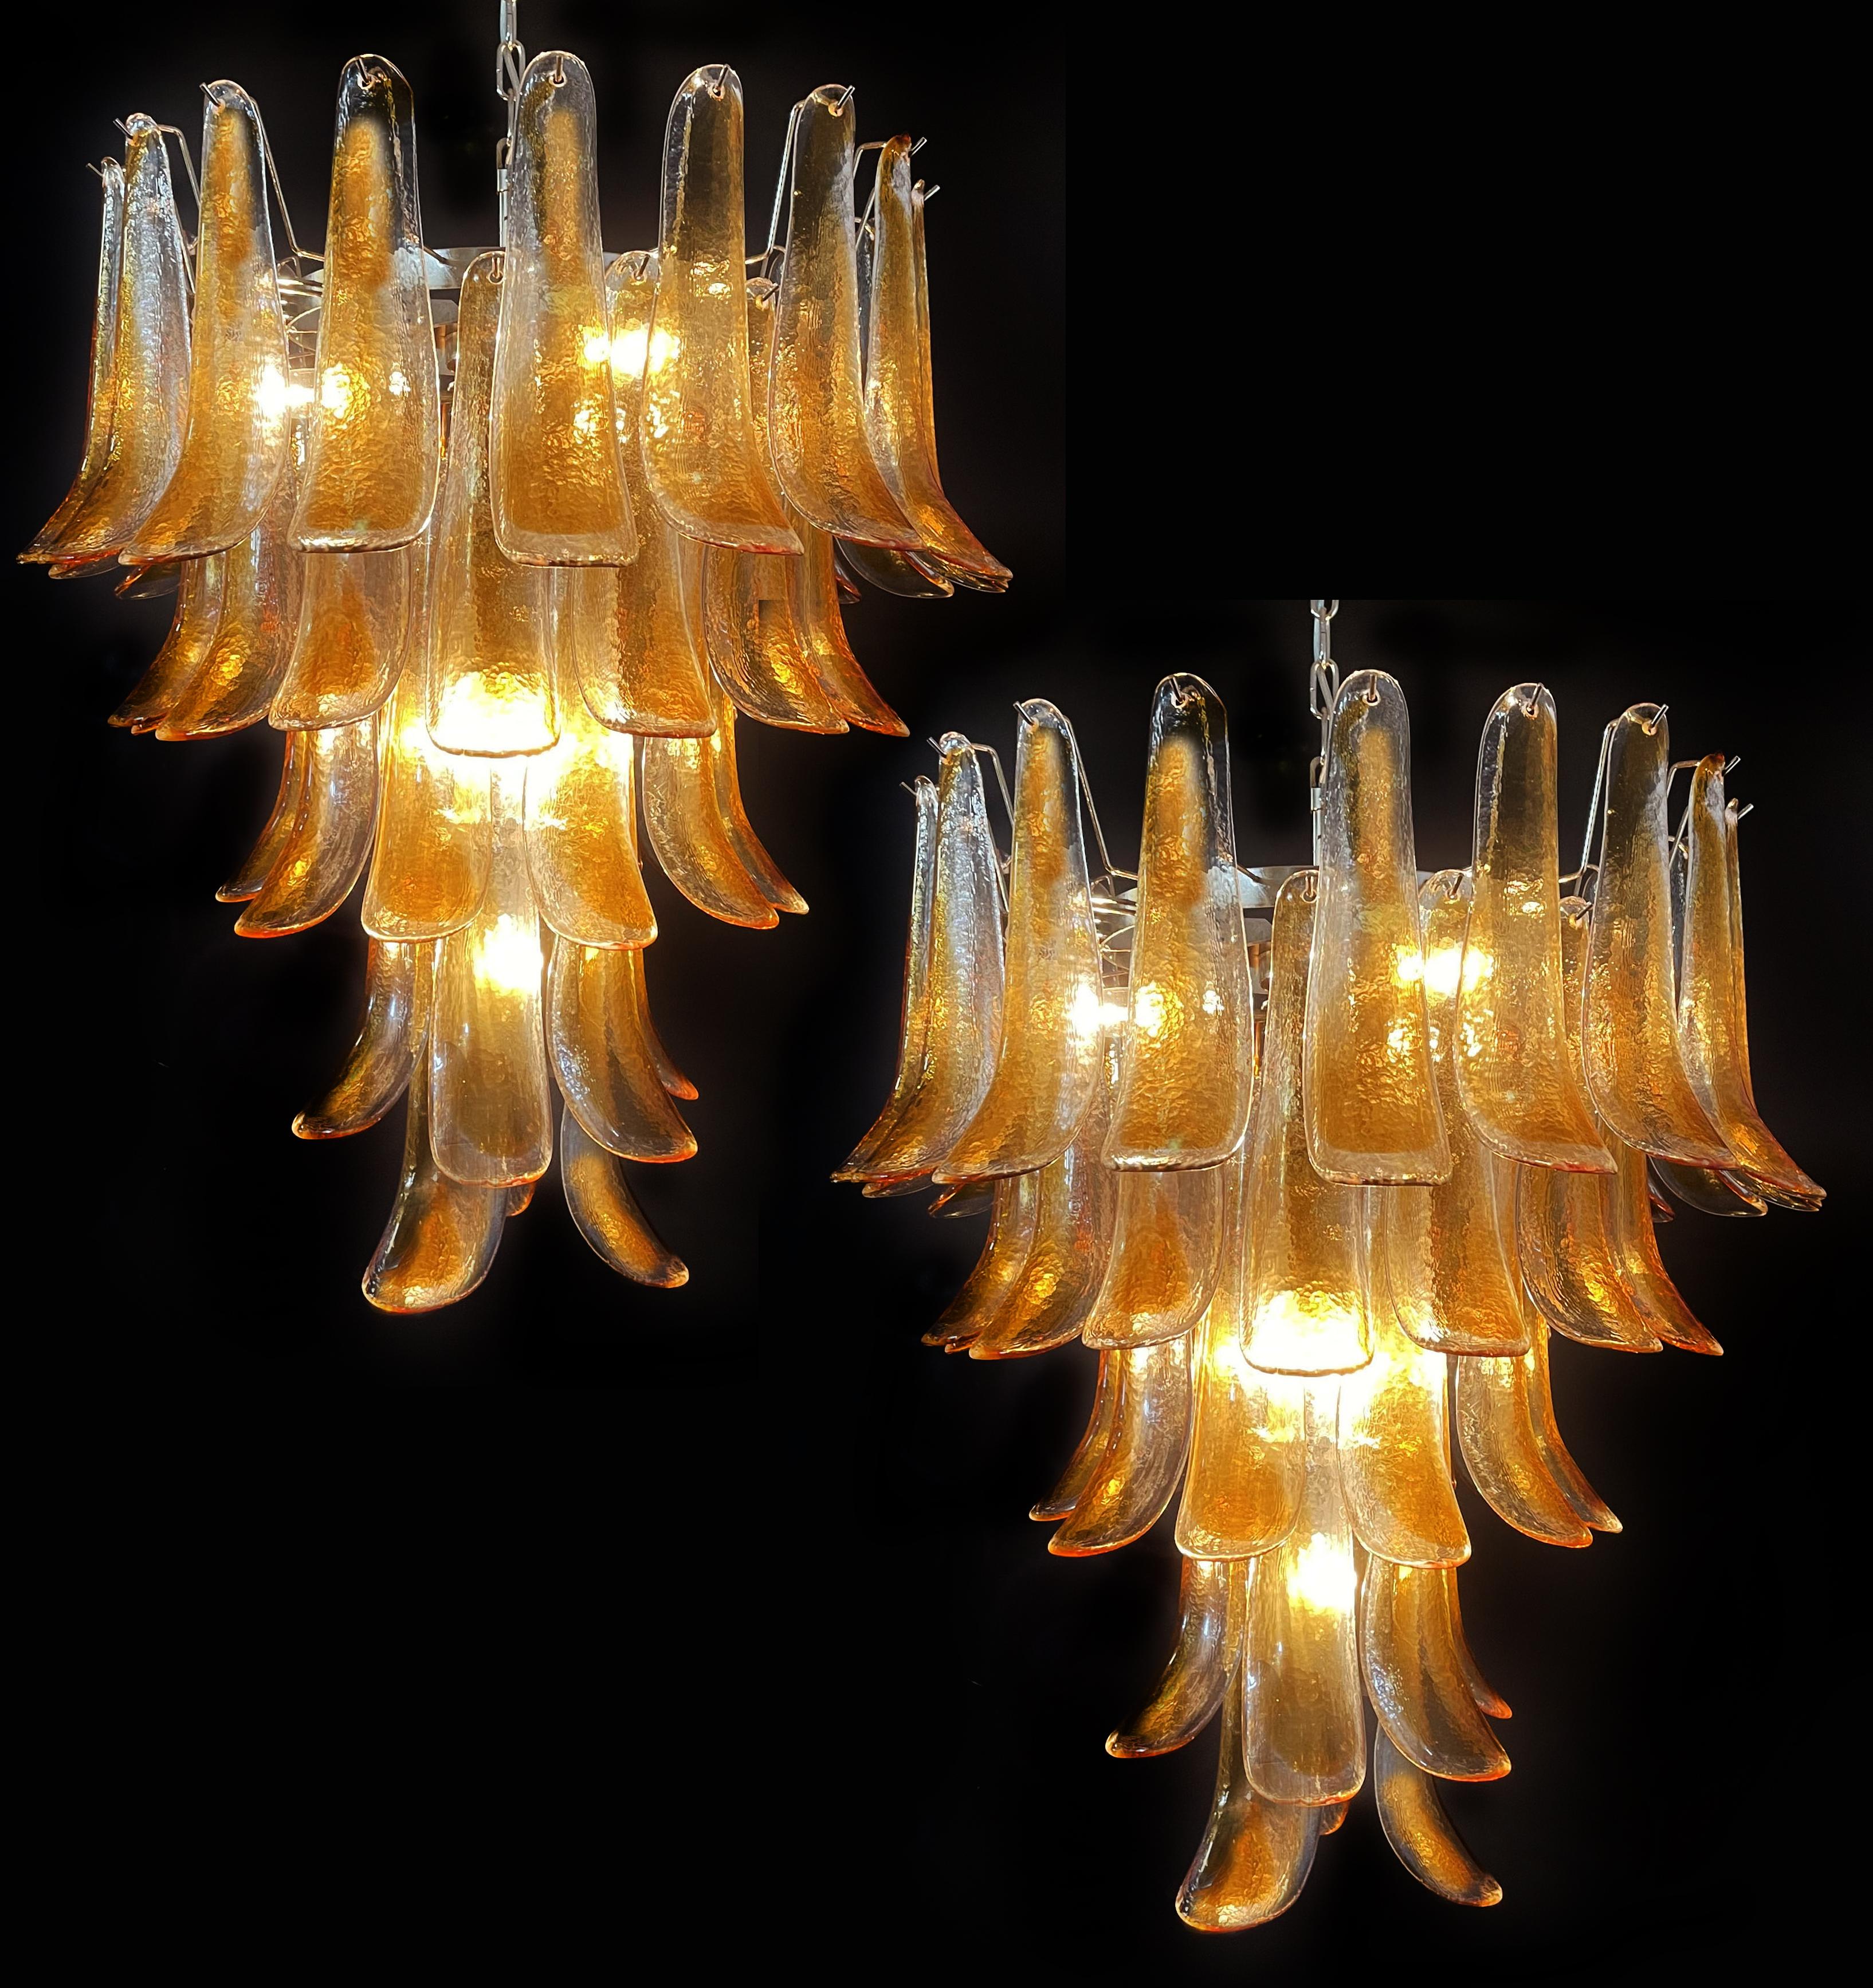 
Italian vintage Murano chandelier made by 52 glass petals transparent with an amber spot inside, nickel metal structure. The glasses are very high quality, the photos do not do the beauty, luster of these glasses. in a chrome frame. Period:late XX